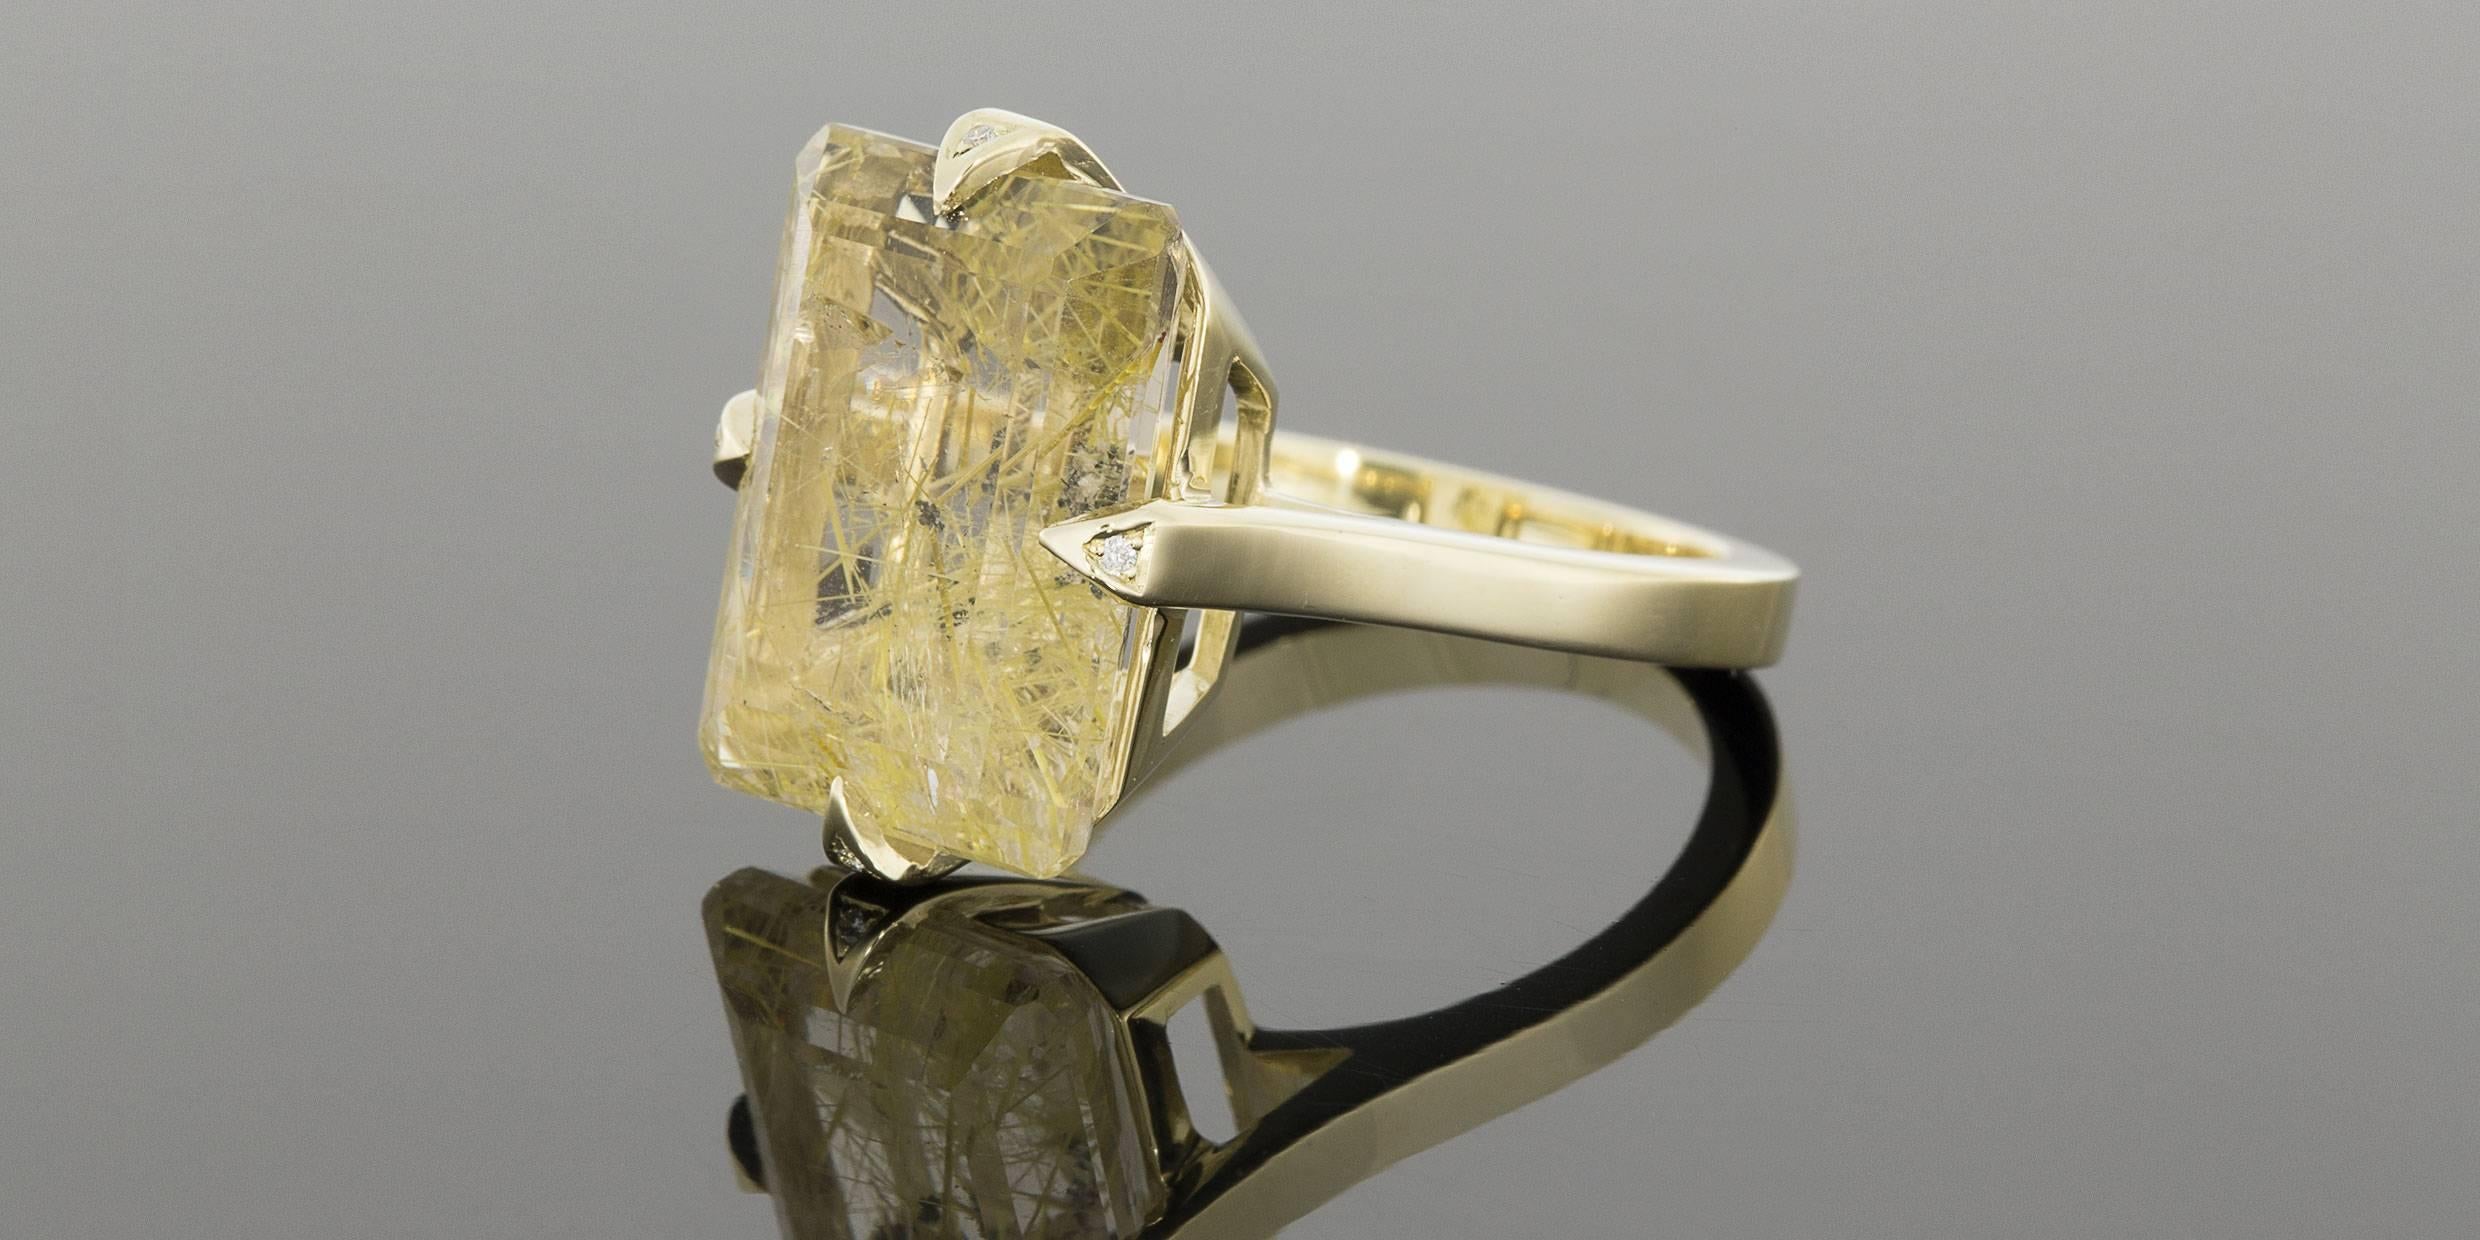 This stunning ring was custom created specifically for this 11.30 carat, emerald cut rutilated quartz. Radiant & warm with its beautiful shades of yellow & gold, this ring is comprised of 10 karat yellow gold & features diamond prongs. The shank